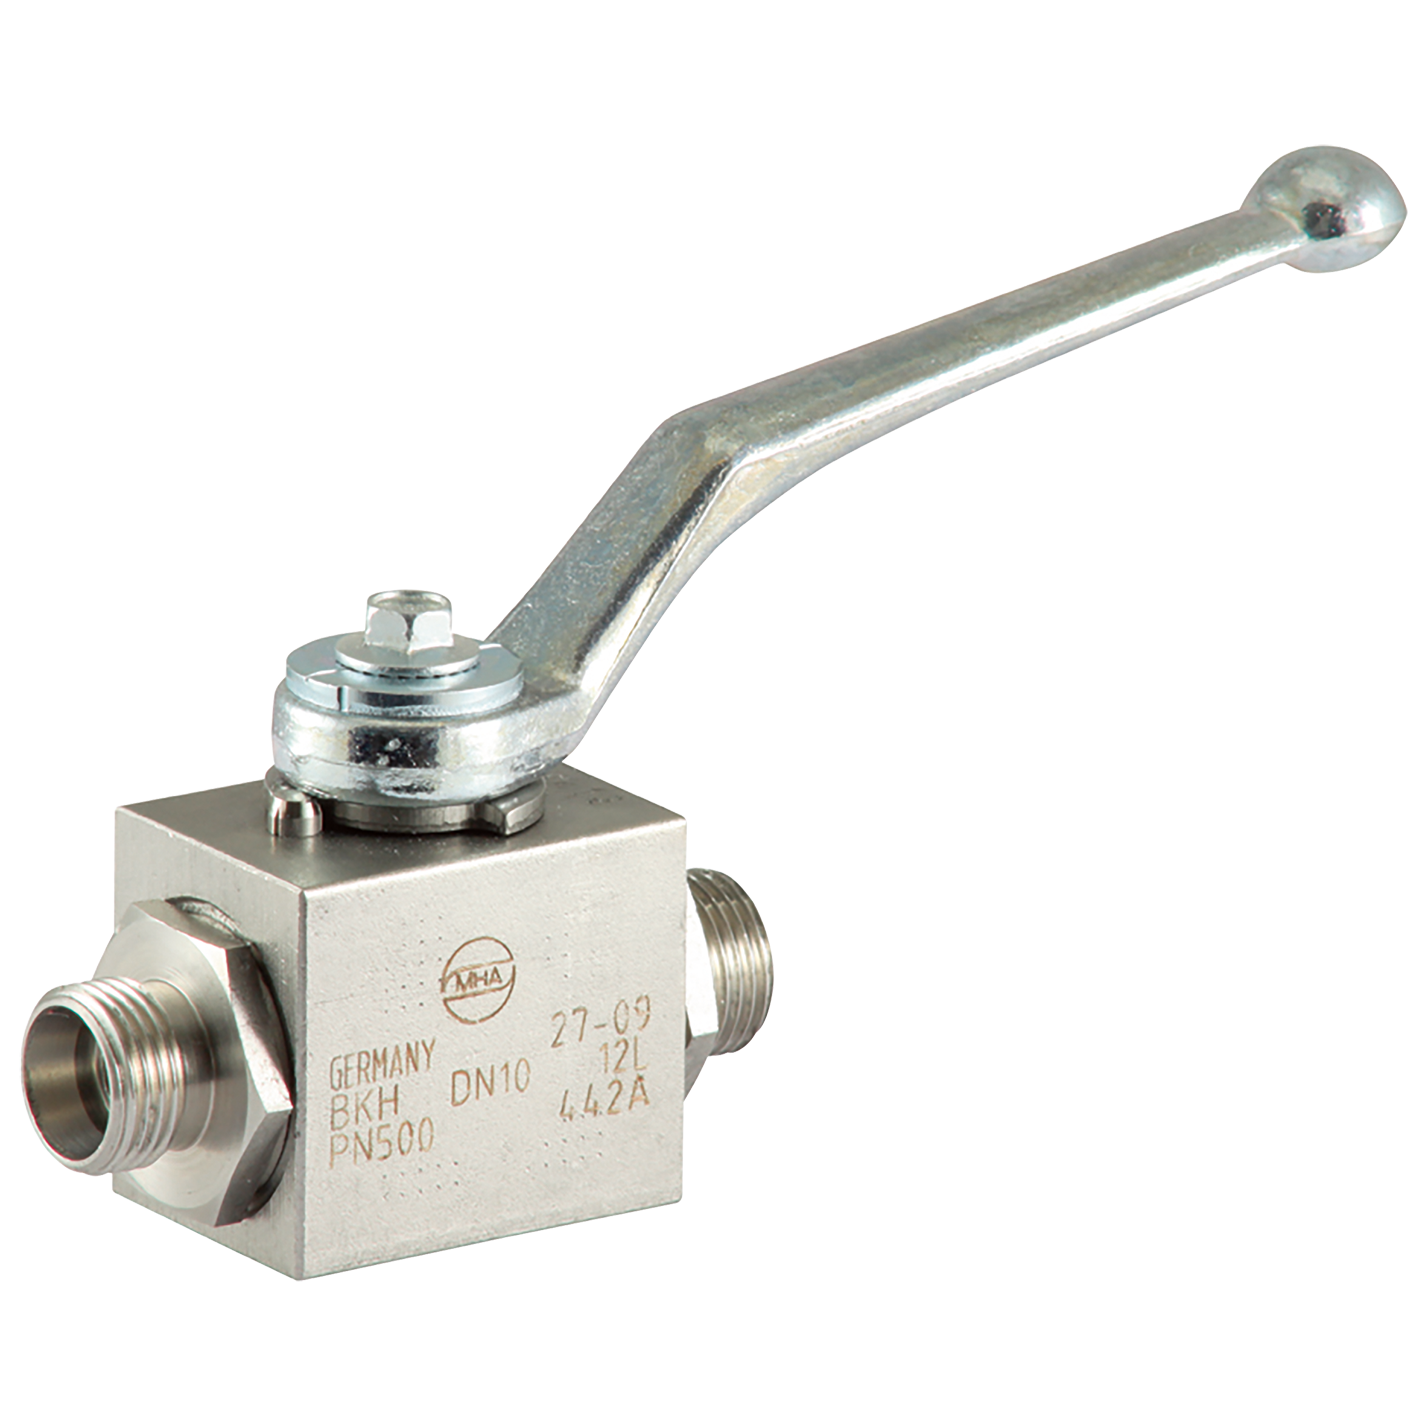 Suppliers of Industrial Valves For Hydraulics UK